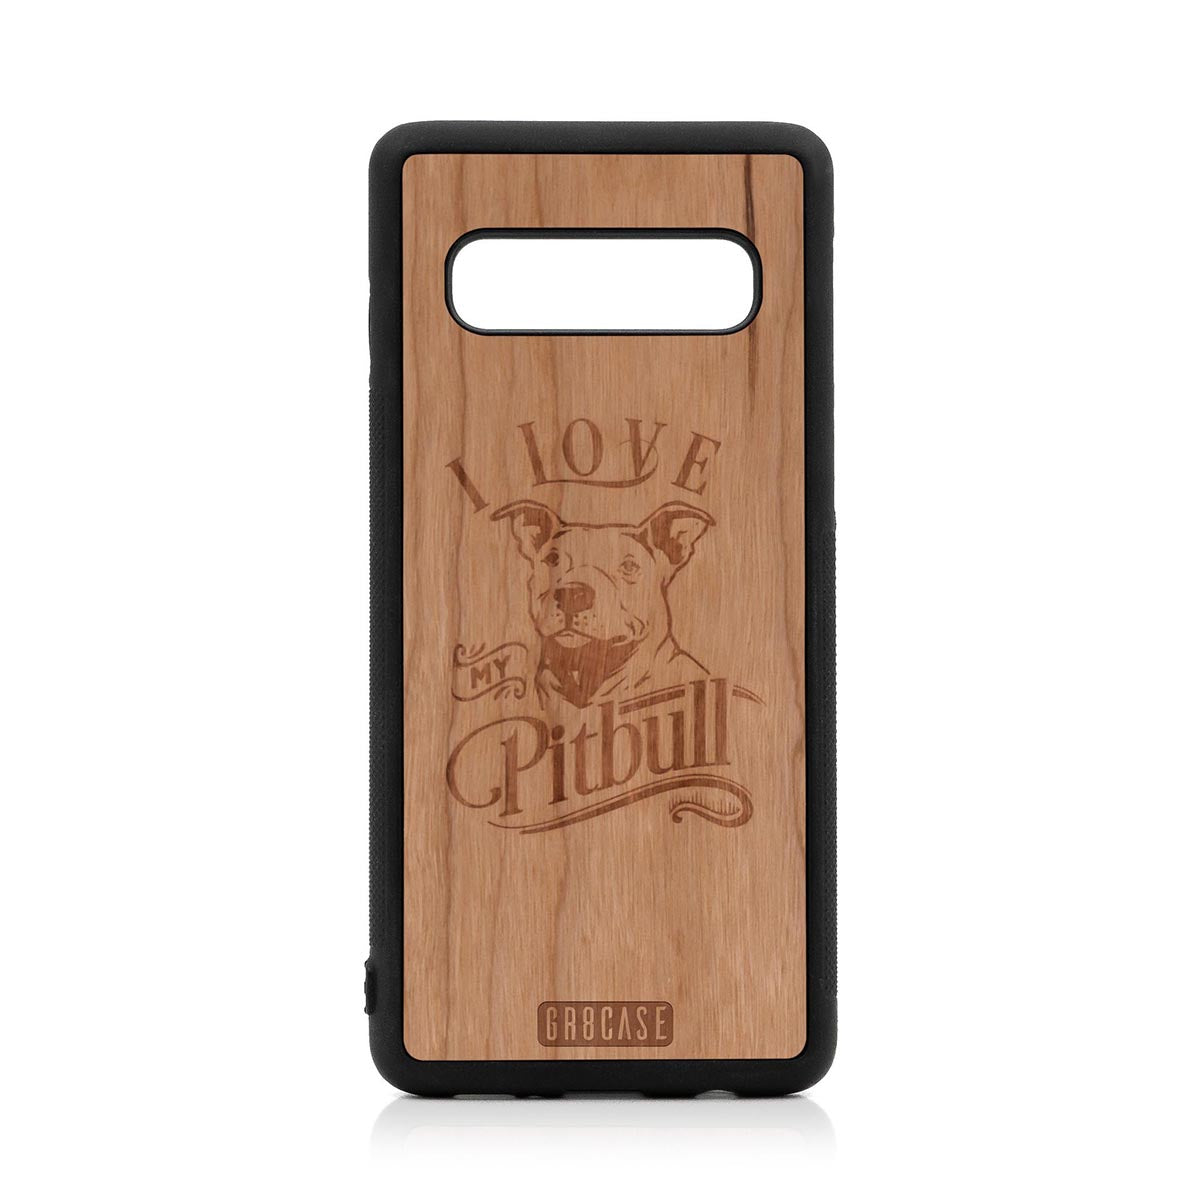 I Love My Pitbull Design Wood Case For Samsung Galaxy S10 by GR8CASE